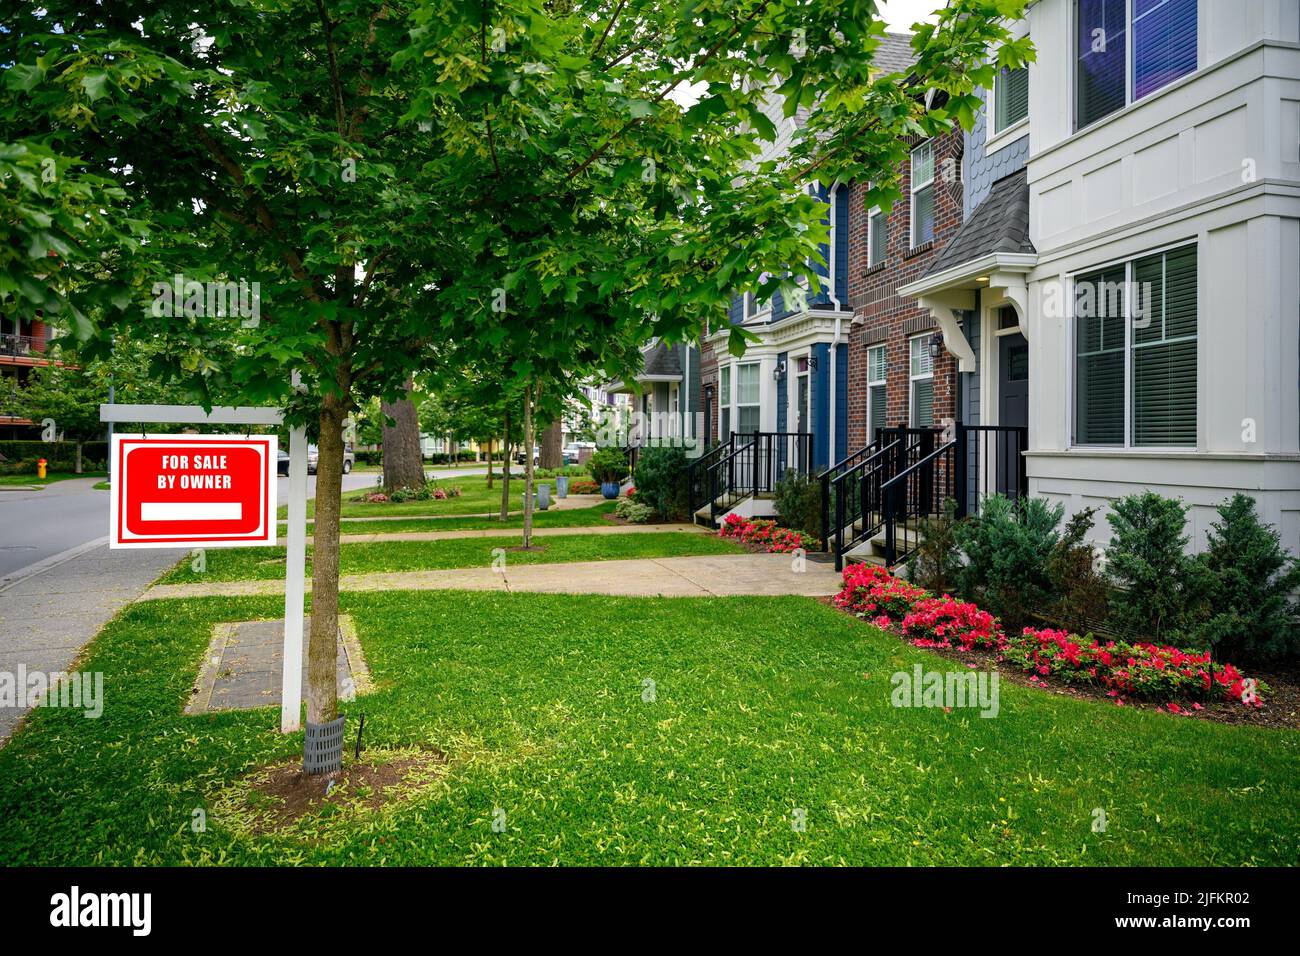 The marketing for sale sign boards of local estate agent outside homes on a street in a nice suburban neighborhood in British Columbia, Canada. Stock Photo